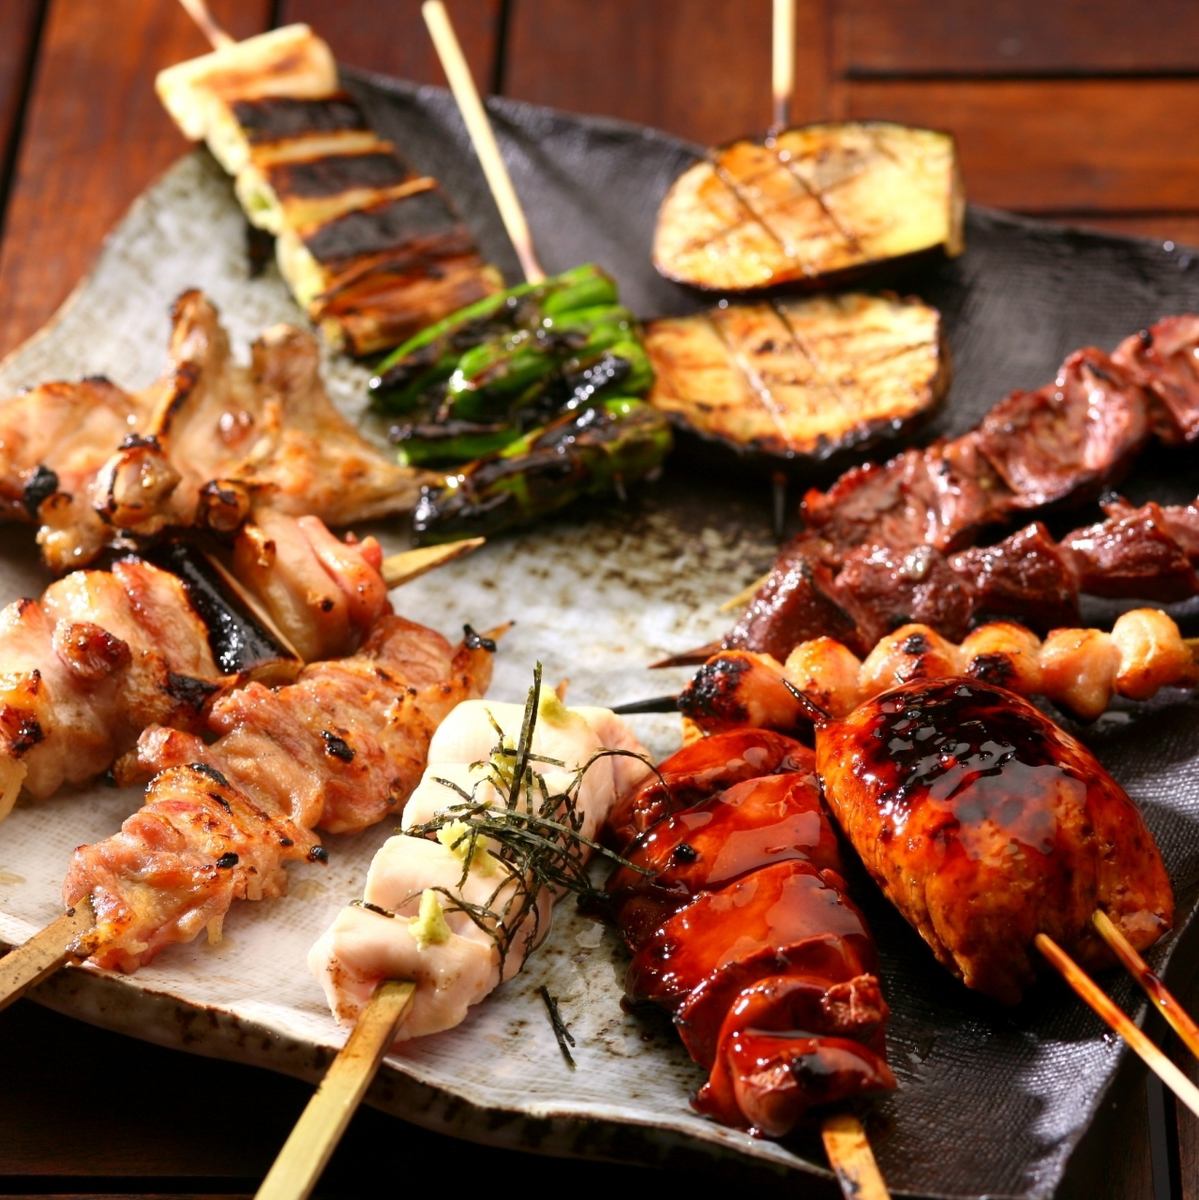 The skewers that have been prepared from noon are all delicious.